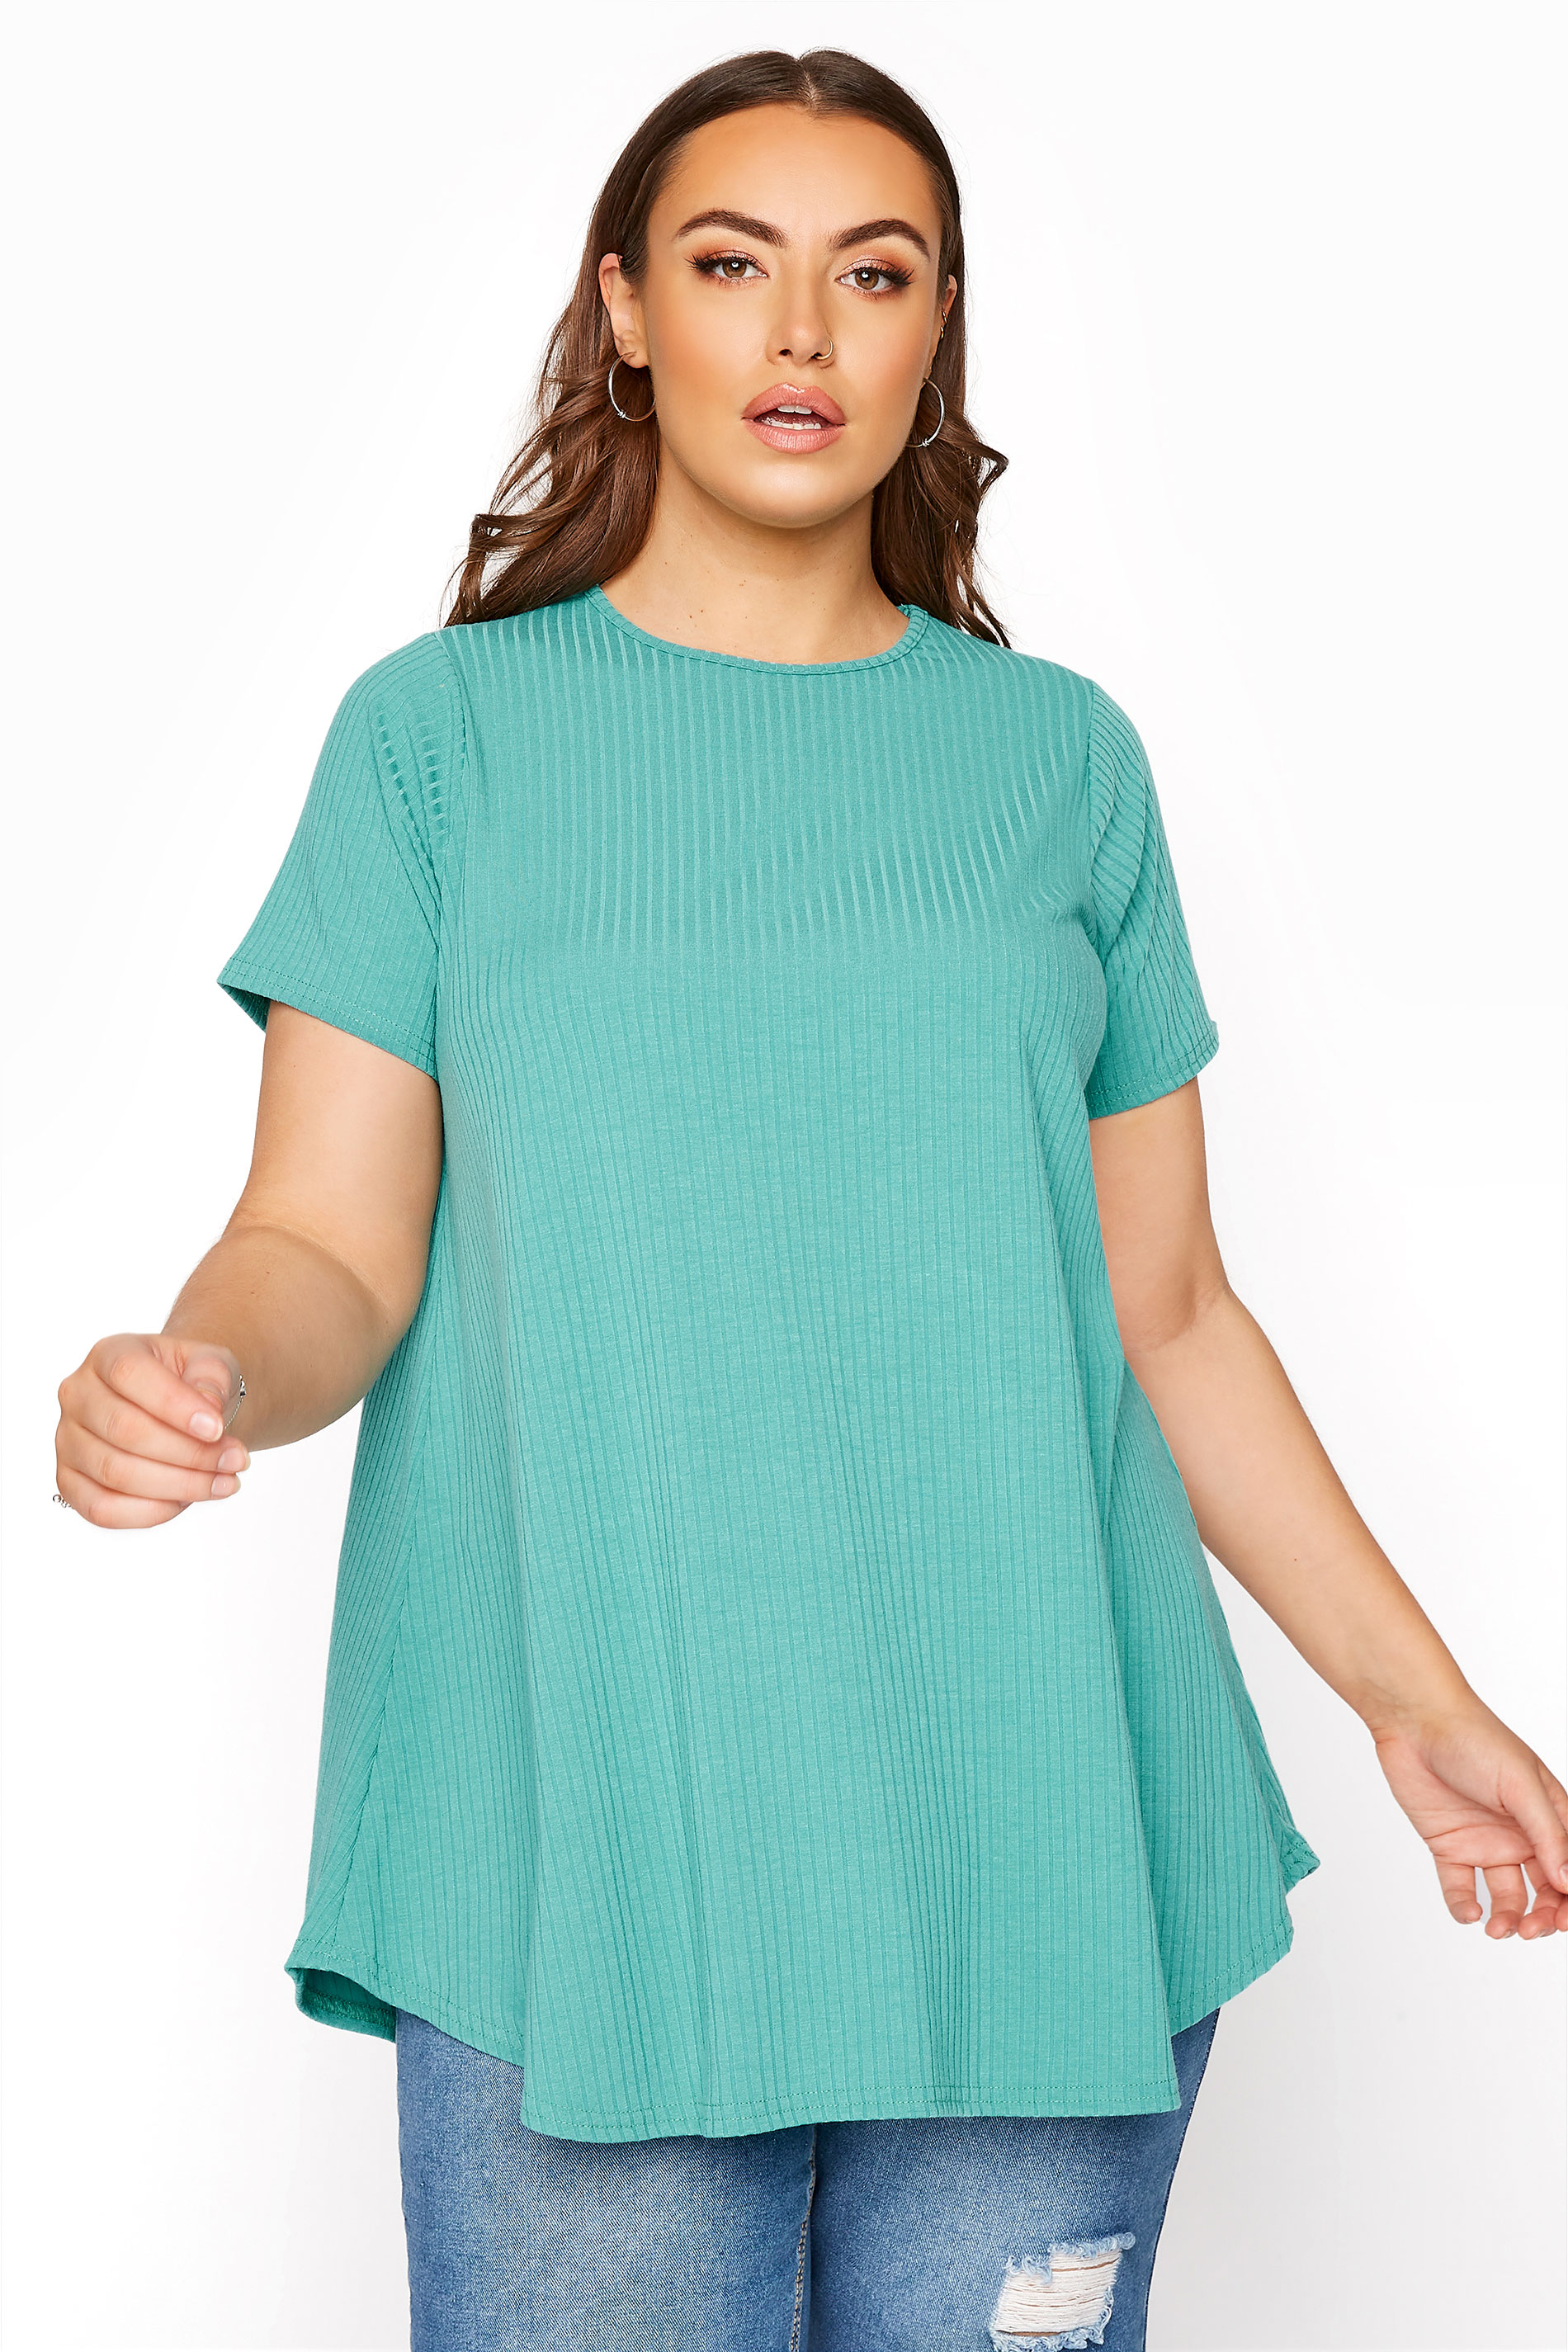 Grande taille  Tops Grande taille  Tops Jersey | LIMITED COLLECTION - T-Shirt Vert Nervuré en Jersey - DB84023